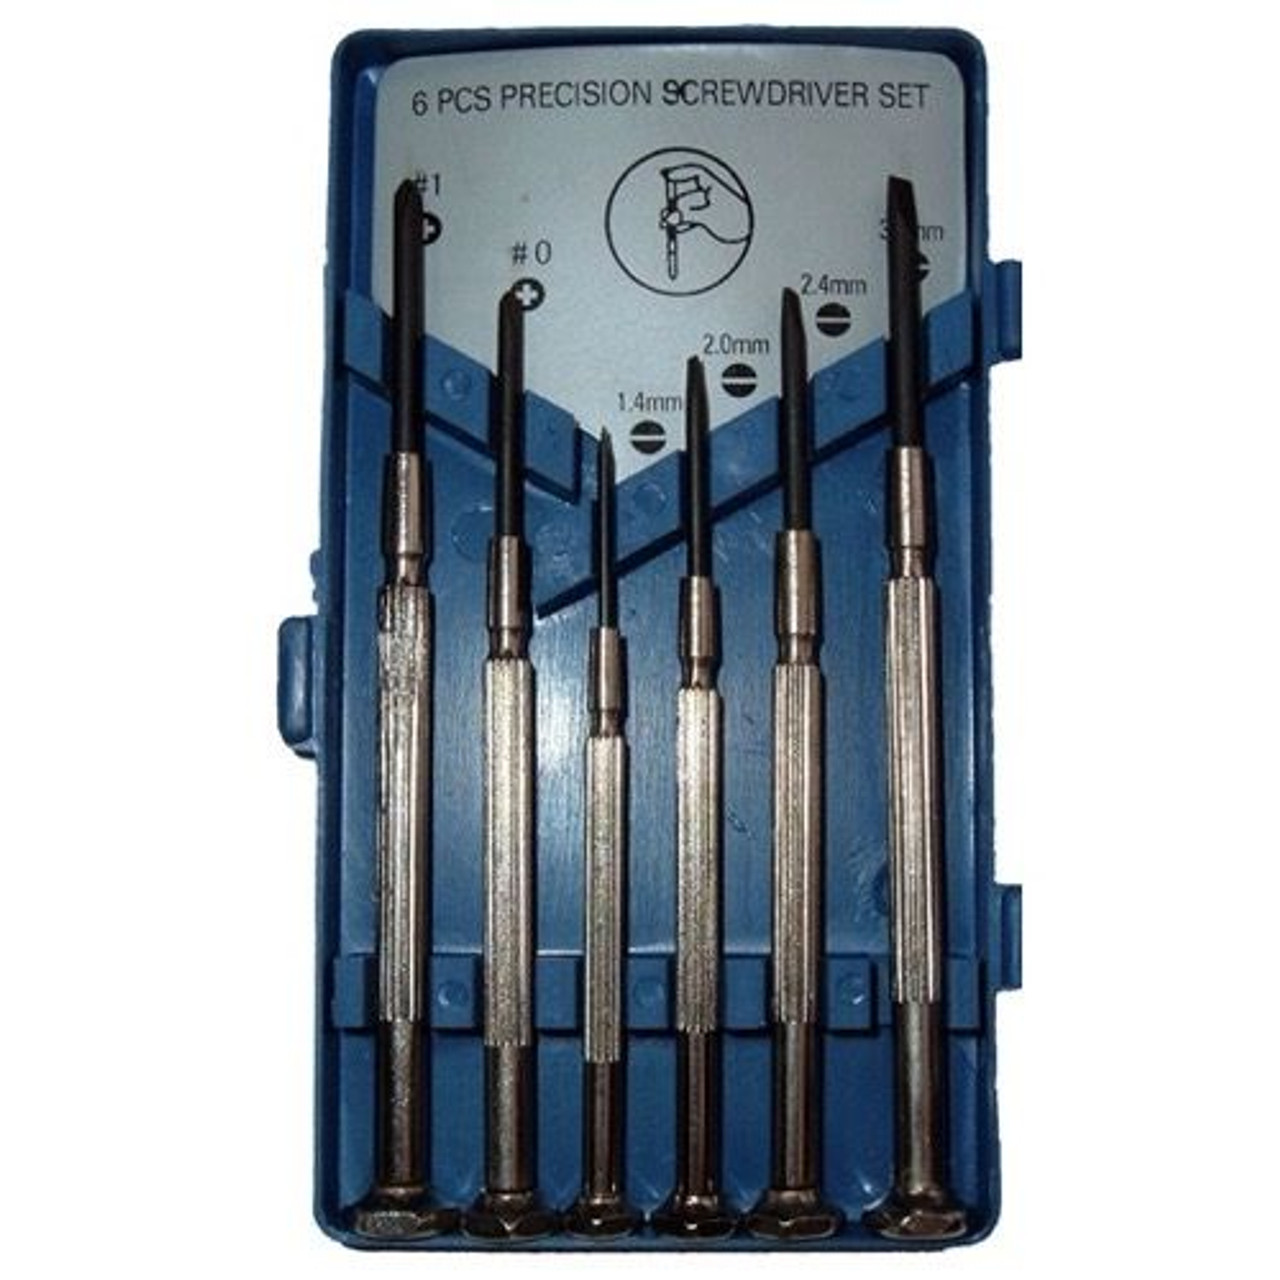 Eagle Jewelers Screw Driver Set 6 Piece SE Precision with Swivel Top, Electronic Equipment and Eye Glasses Adjustment Tools, Part # 750SDC